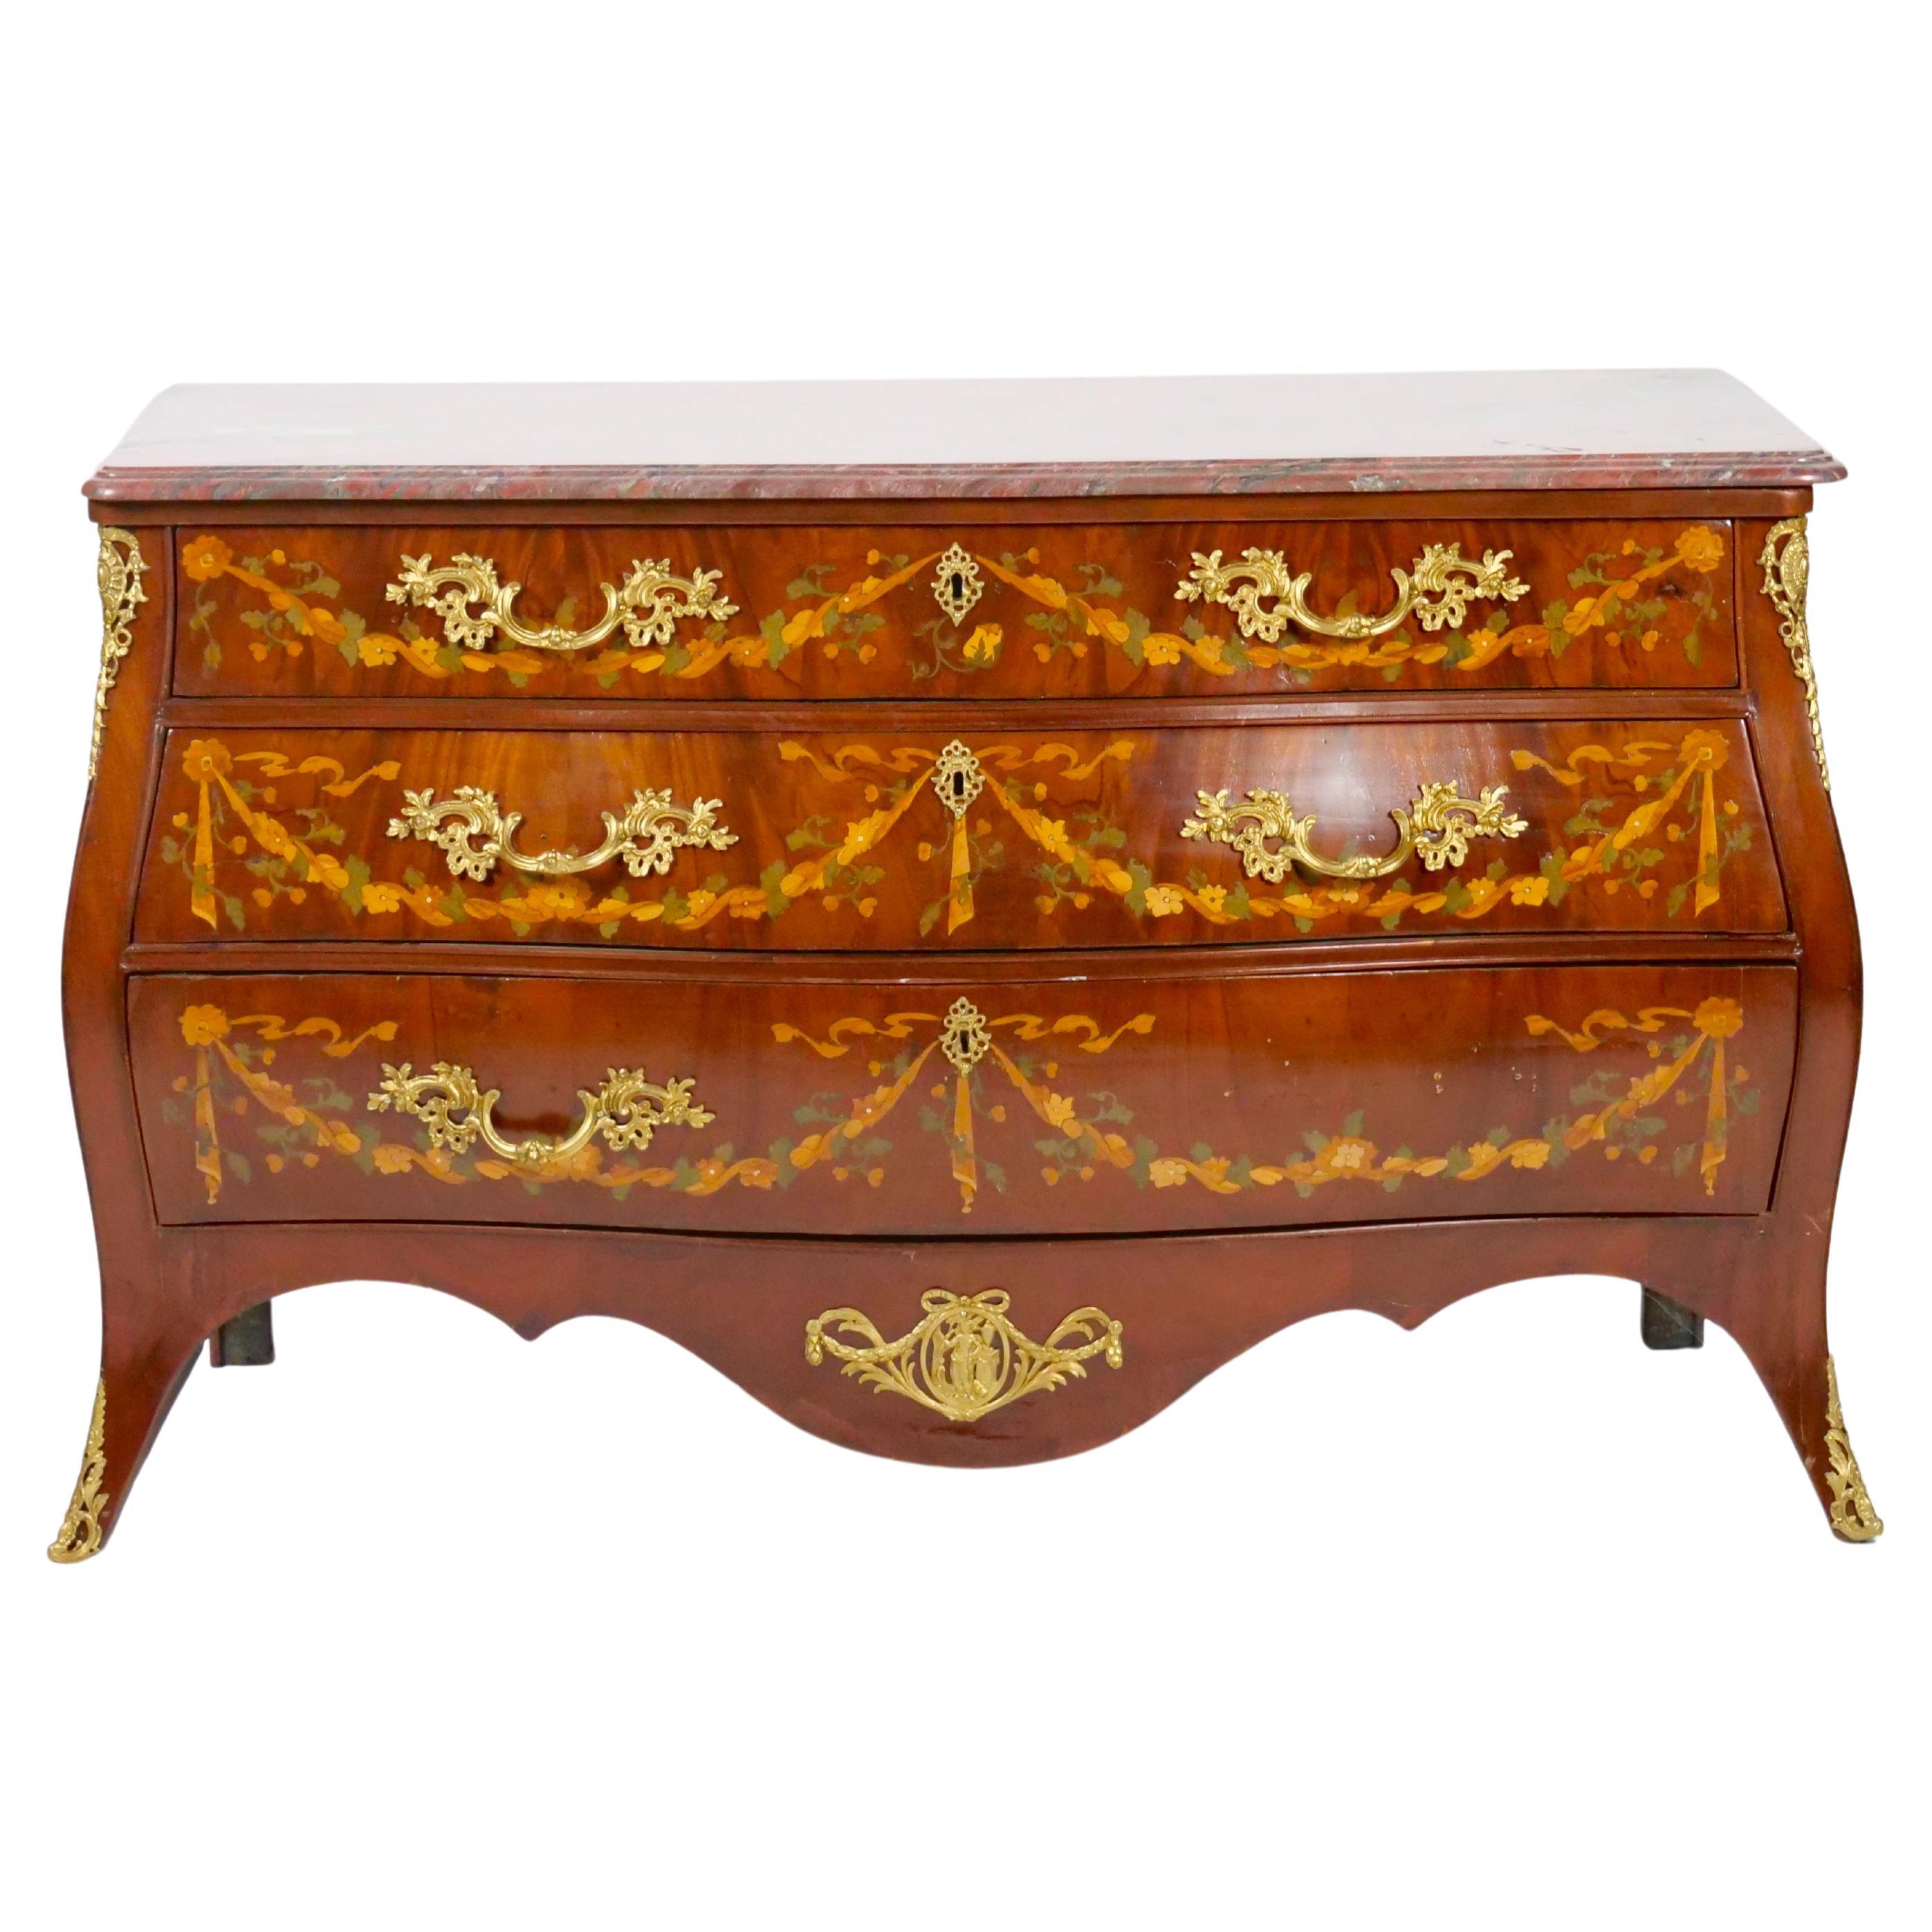 Antique Marble Top Floral Marquetry Inlaid Mahogany Commode / Credenza For Sale